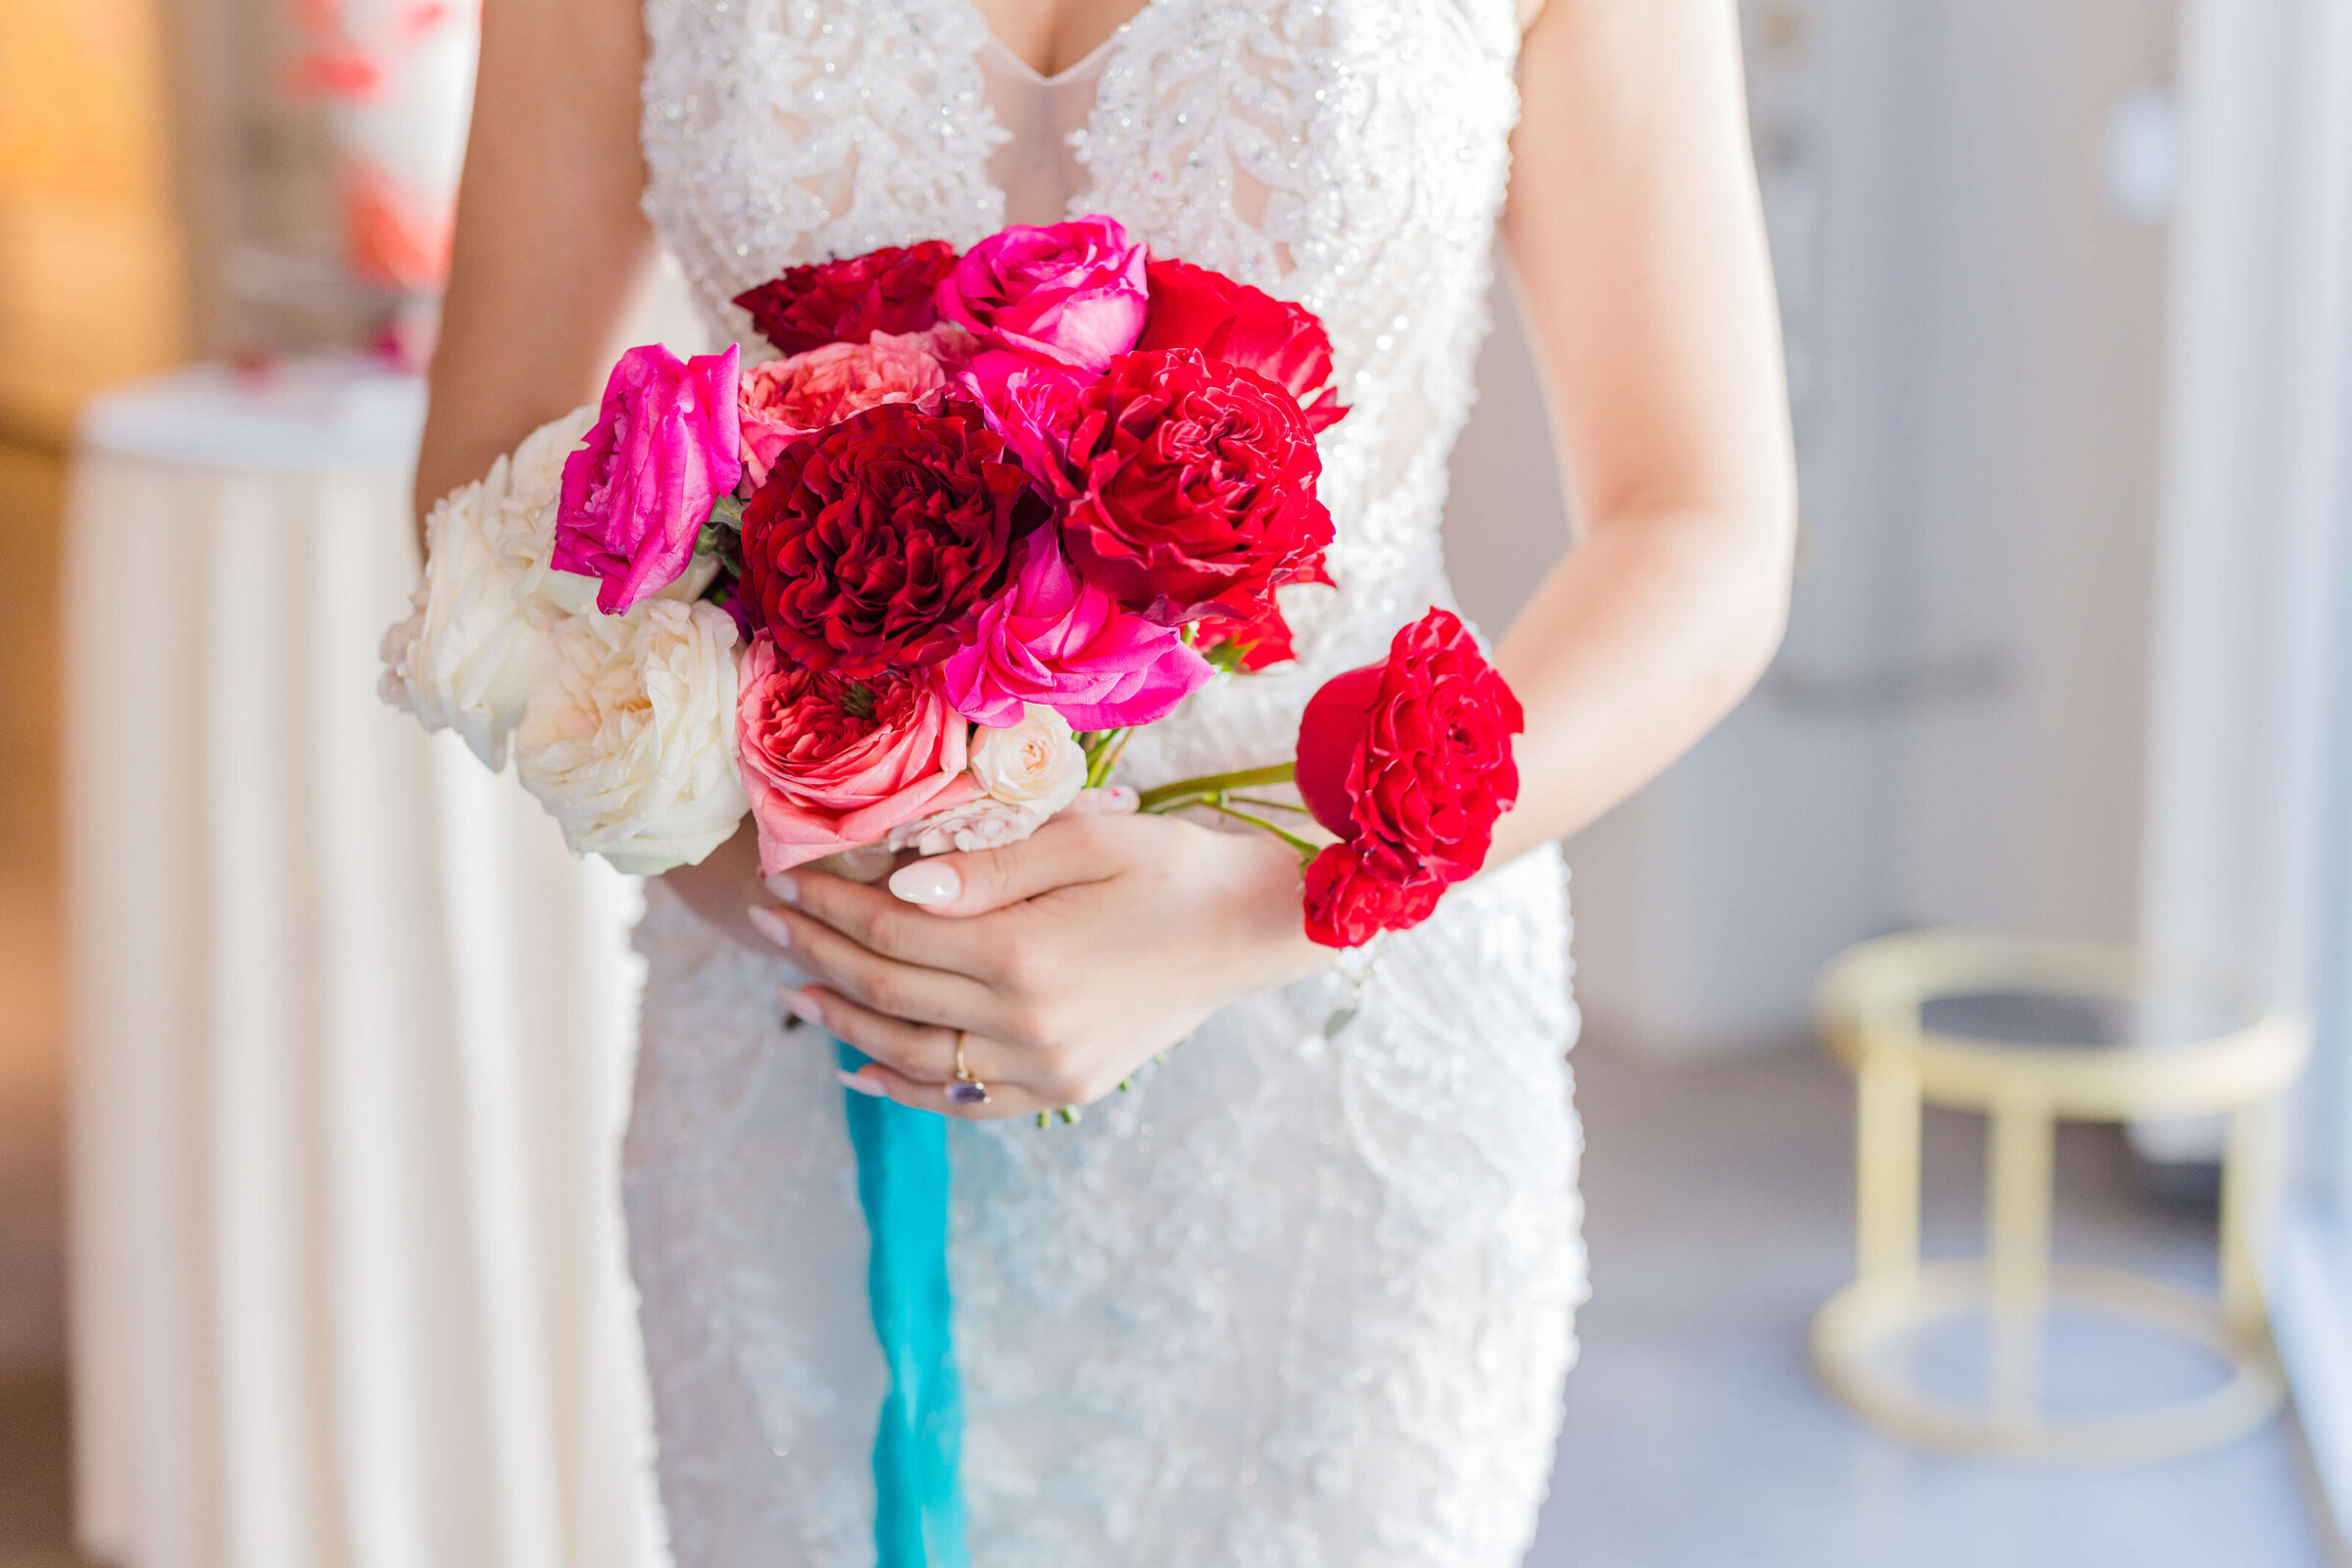 A bride holding a hot pink and red bouquet